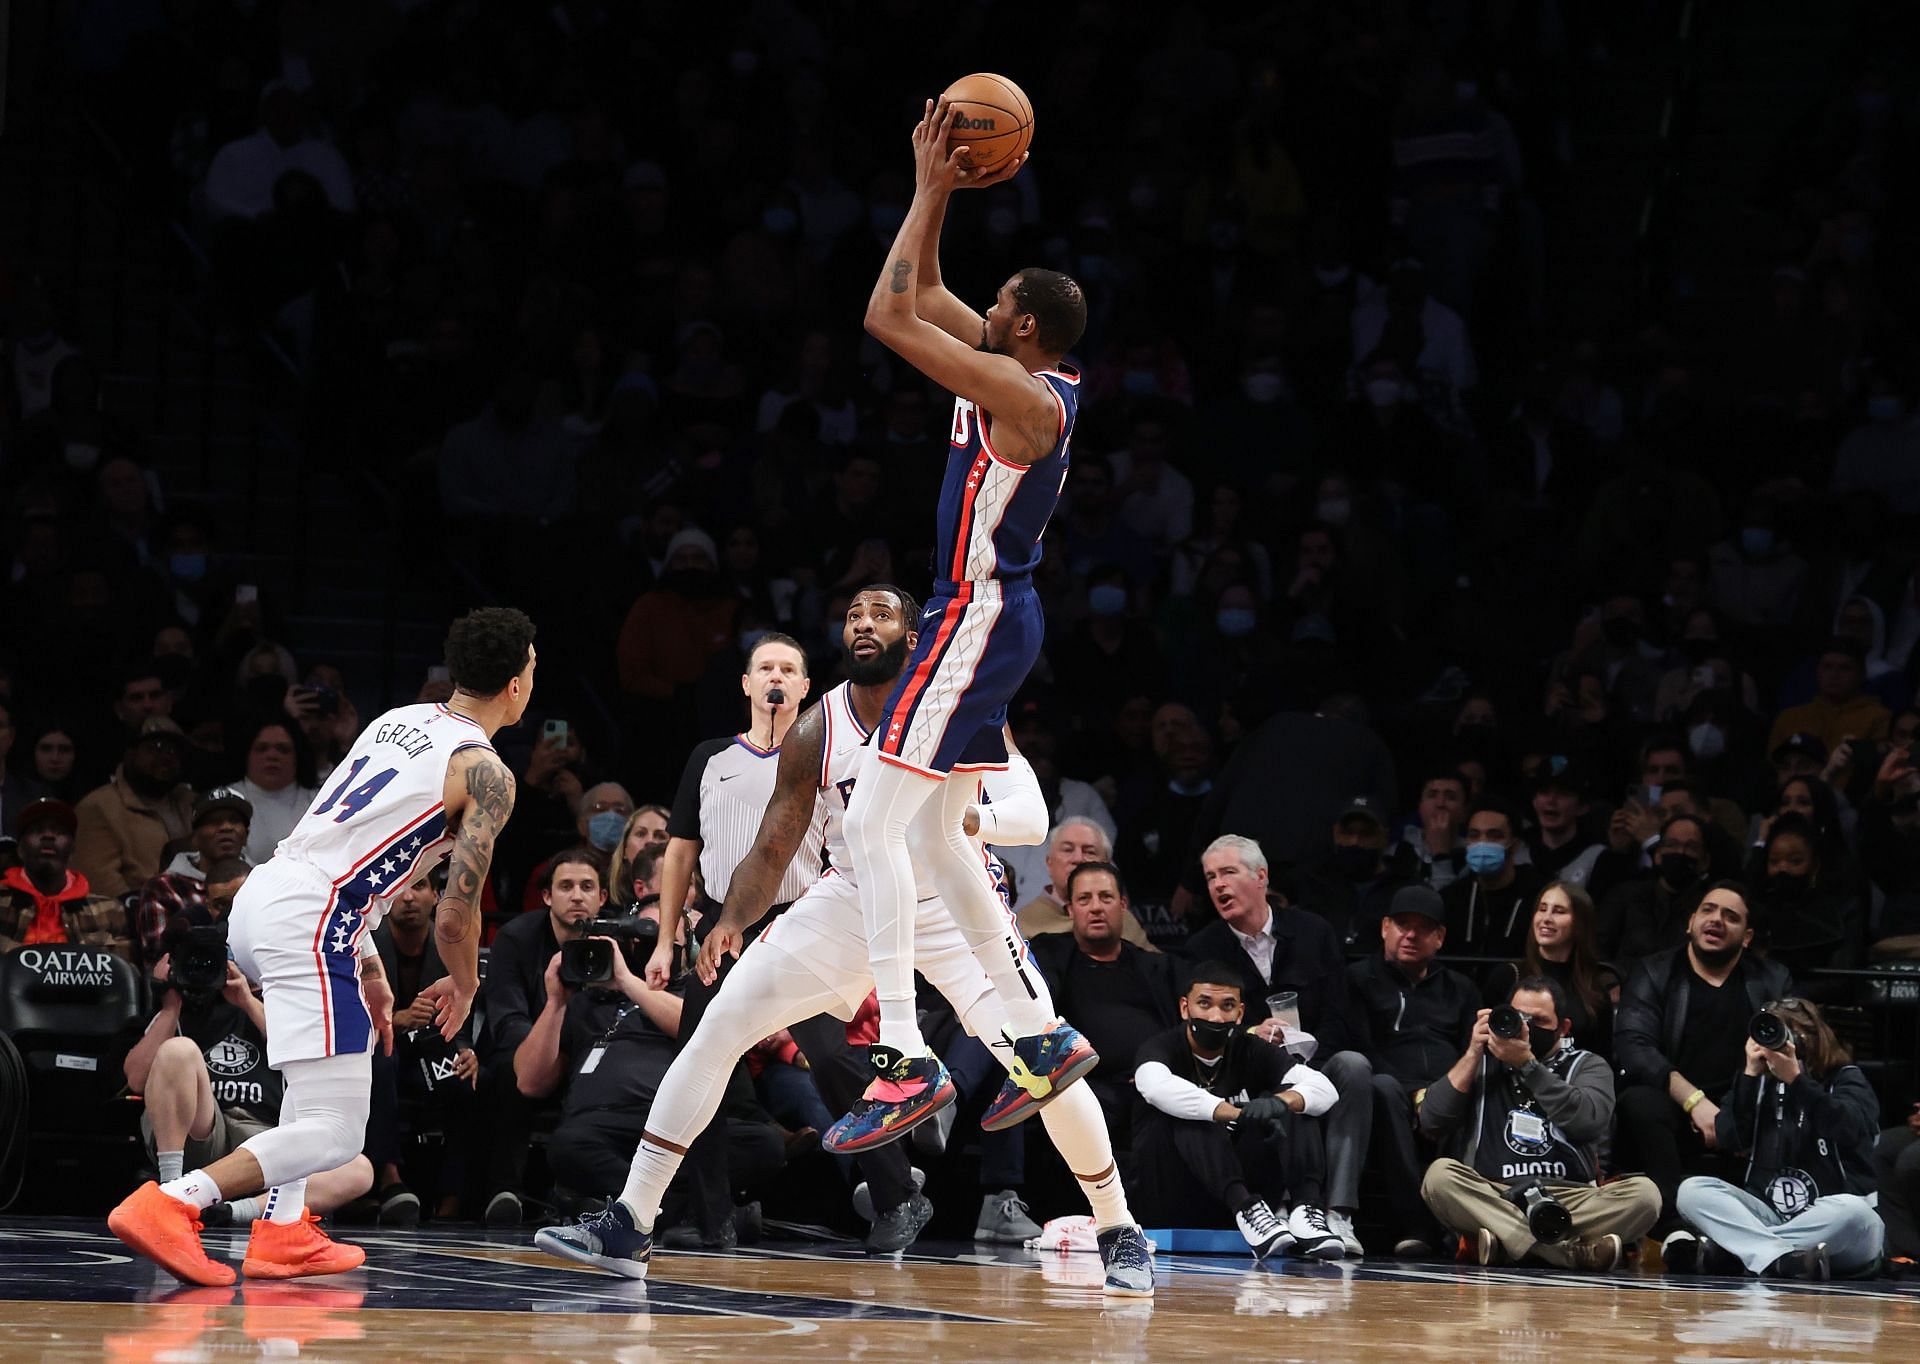 Philadelphia 76ers v Brooklyn Nets; Kevin Durant shoots over two opponents